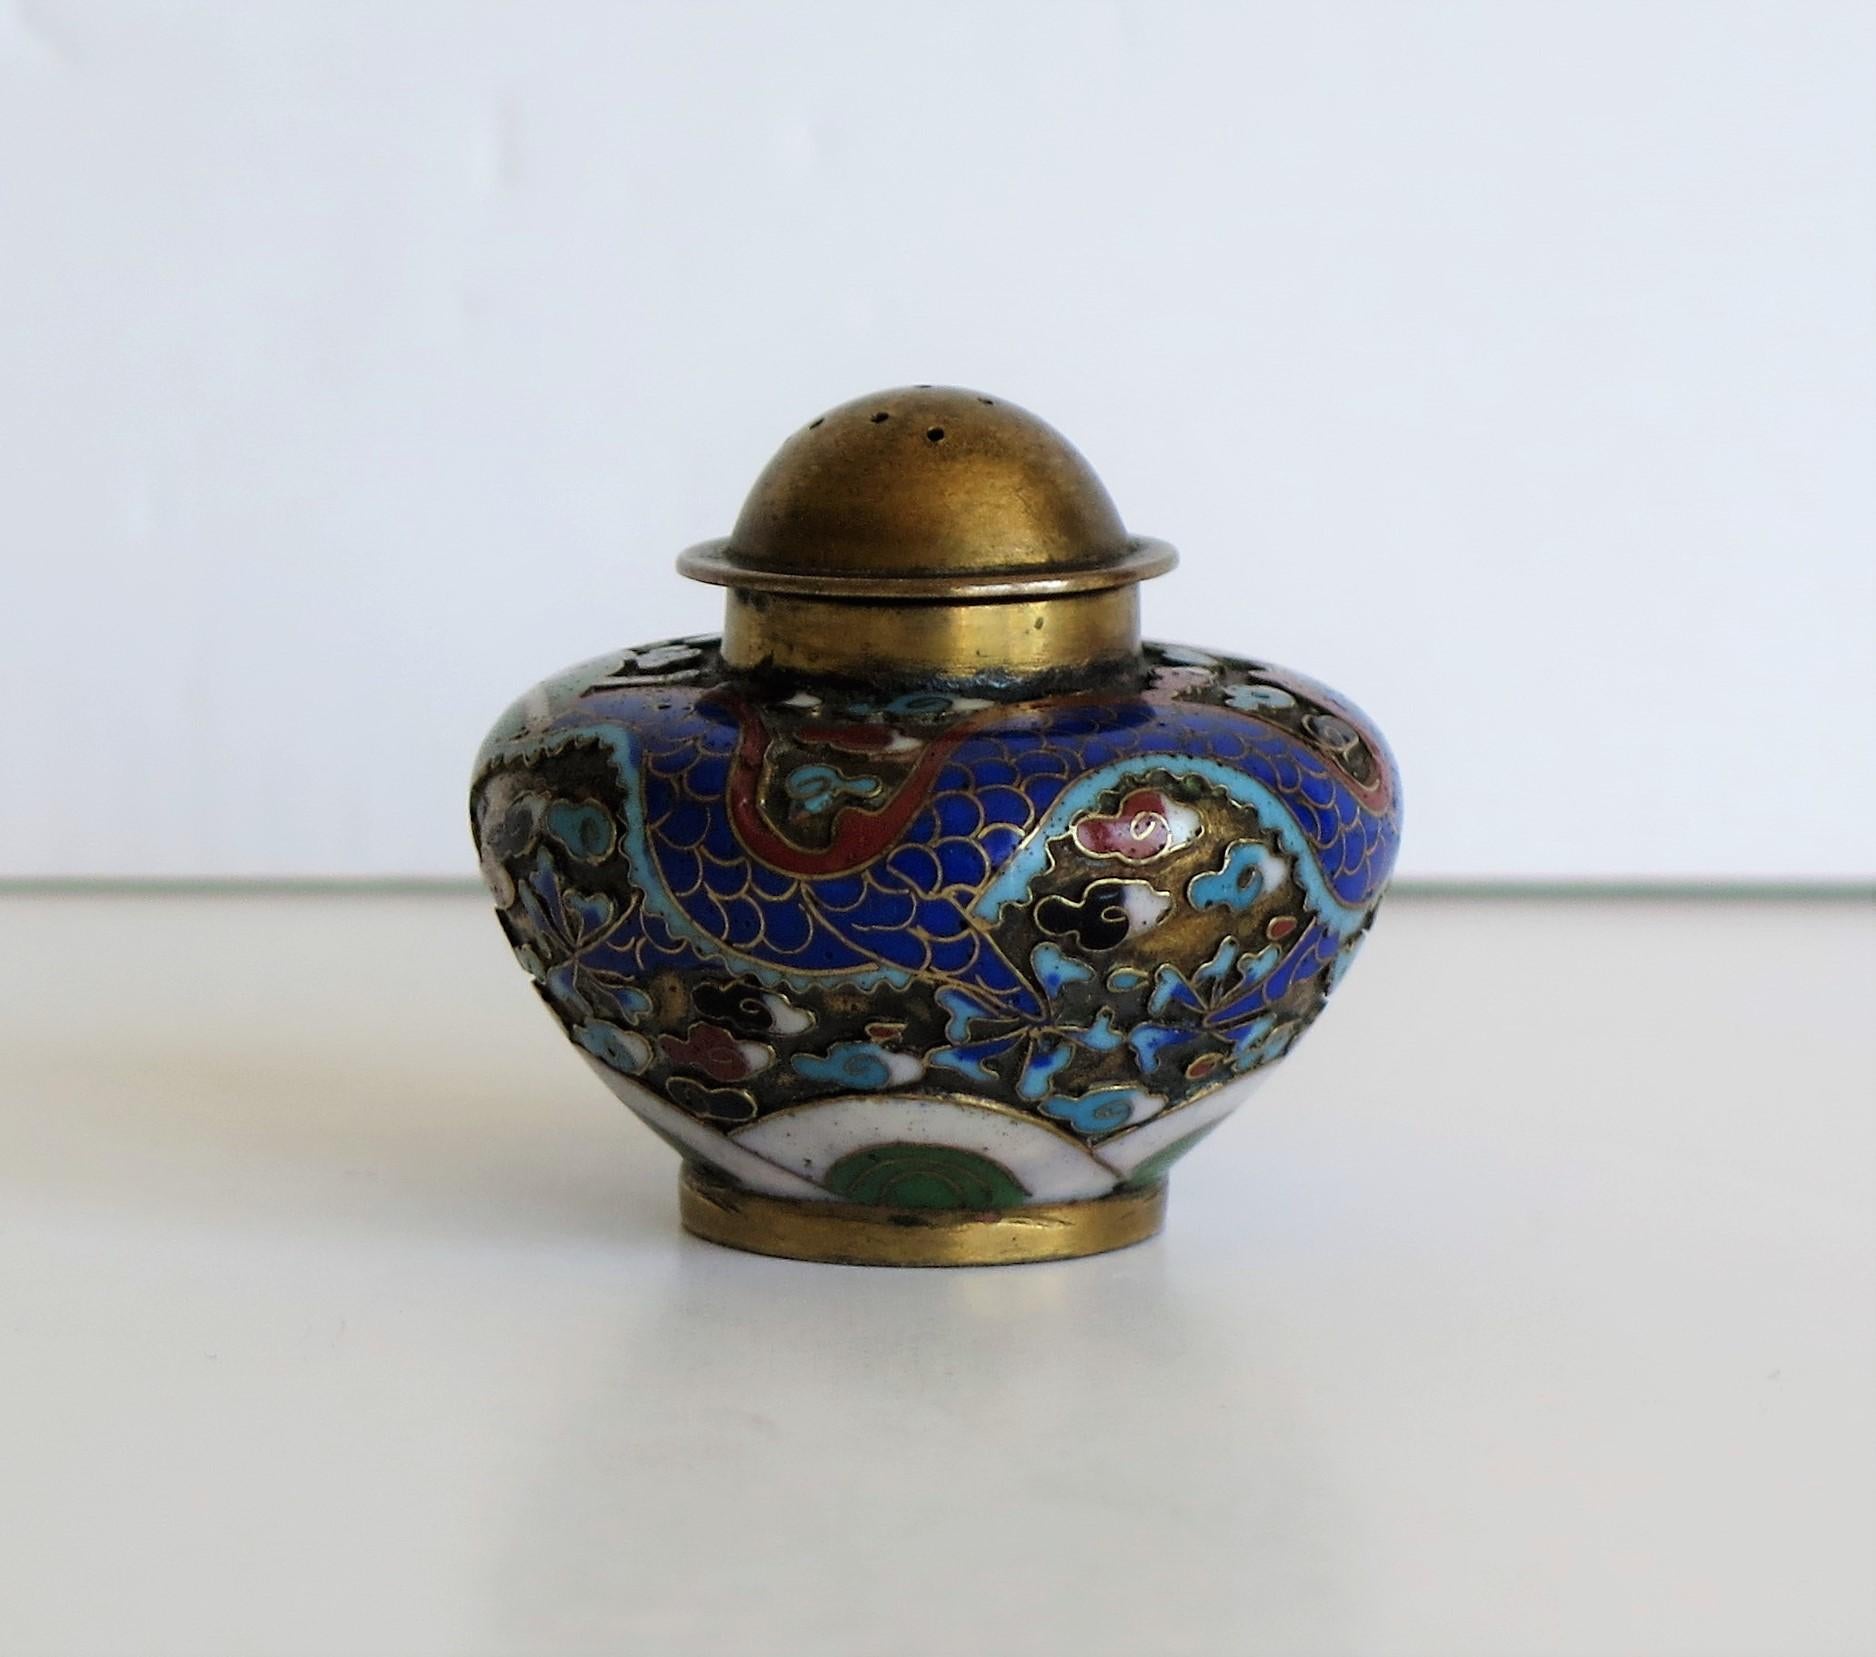 19th Century Chinese Cloisonné Pepper Pot with Dragon Decoration, Qing Dynasty 4